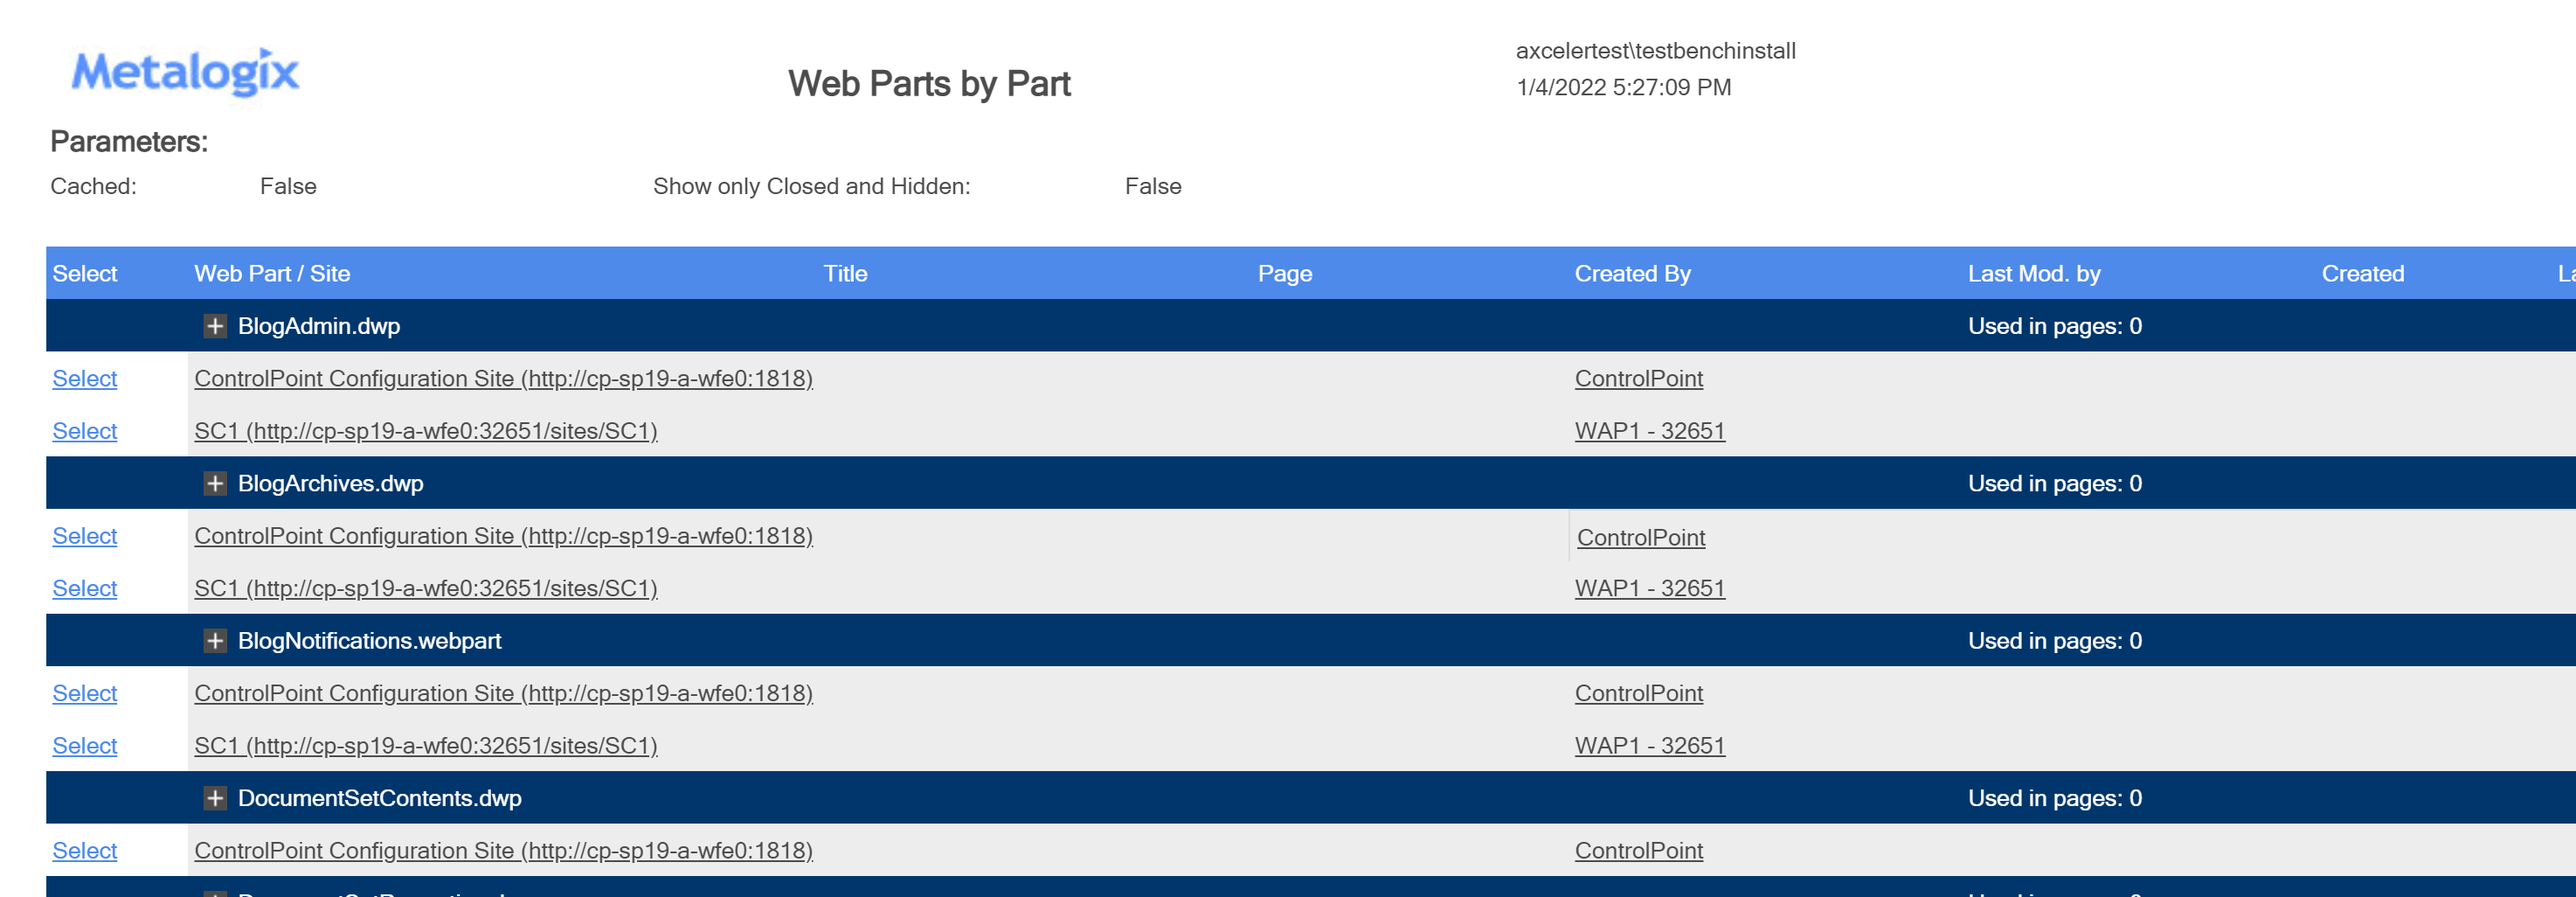 Web Parts by Part RESULTS